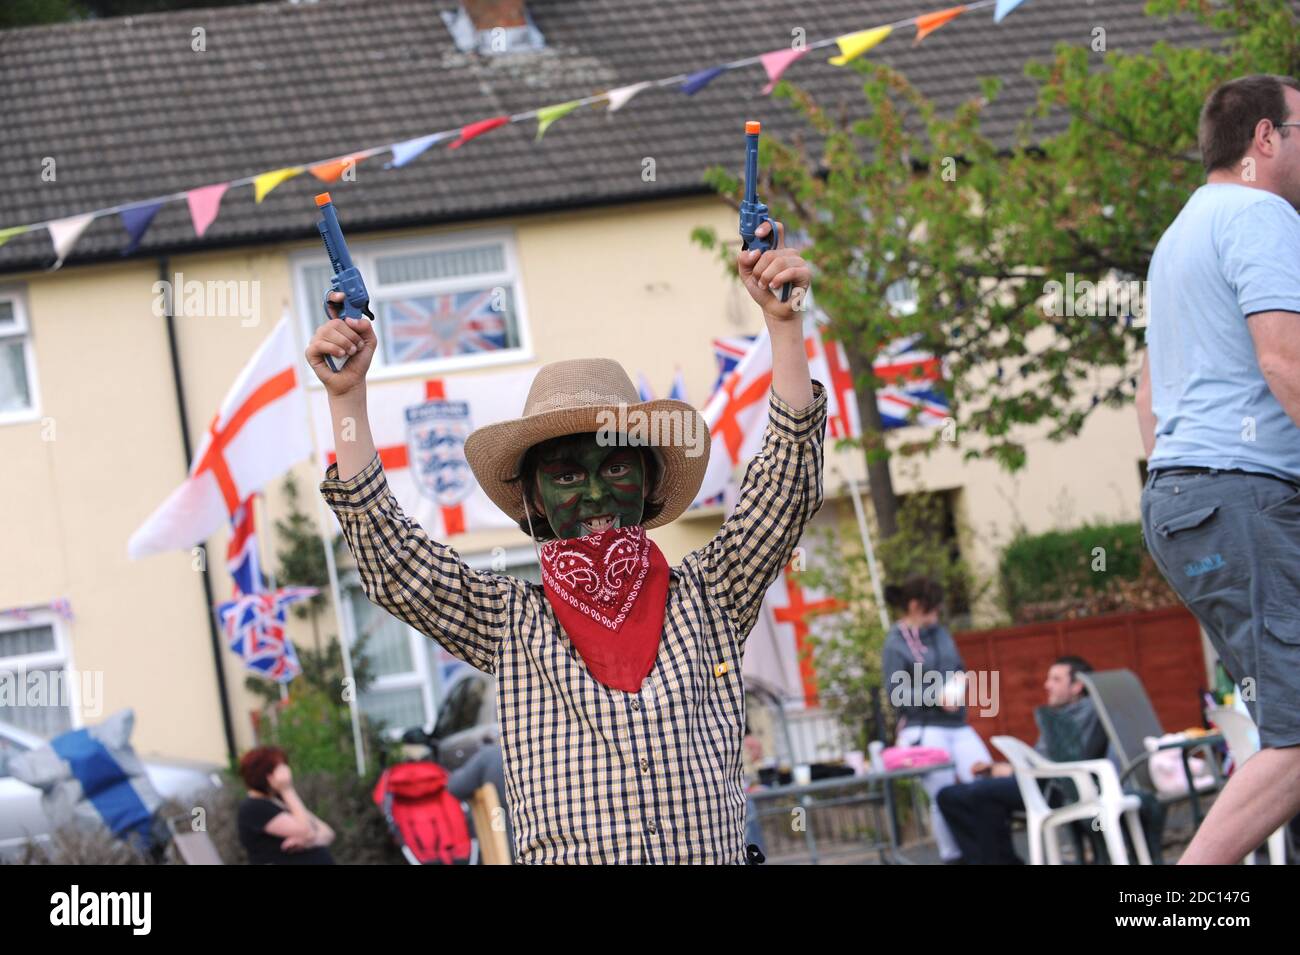 Royal Wedding Street party in strada superiore, Madeley, Telford. Foto Stock